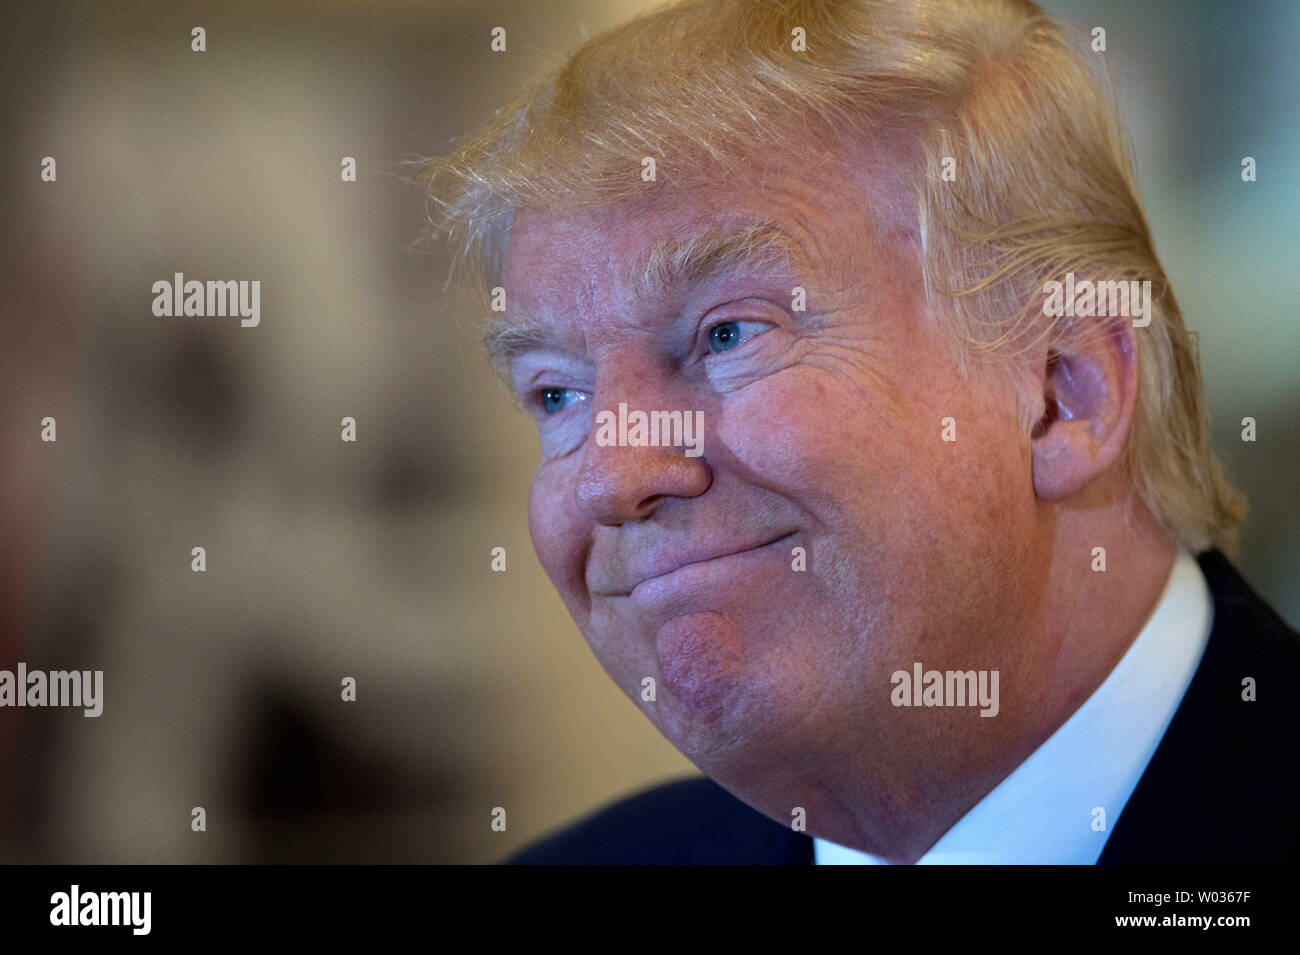 Presumptive Republican nominee for president Donald Trump speaks at a press conference at Trump Tower on May 31, 2016, in New York City. The Democratic primary between Hillary Clinton and Bernie Sanders is reaching its final weeks.  Photo by Bryan R. Smith/UPI Stock Photo